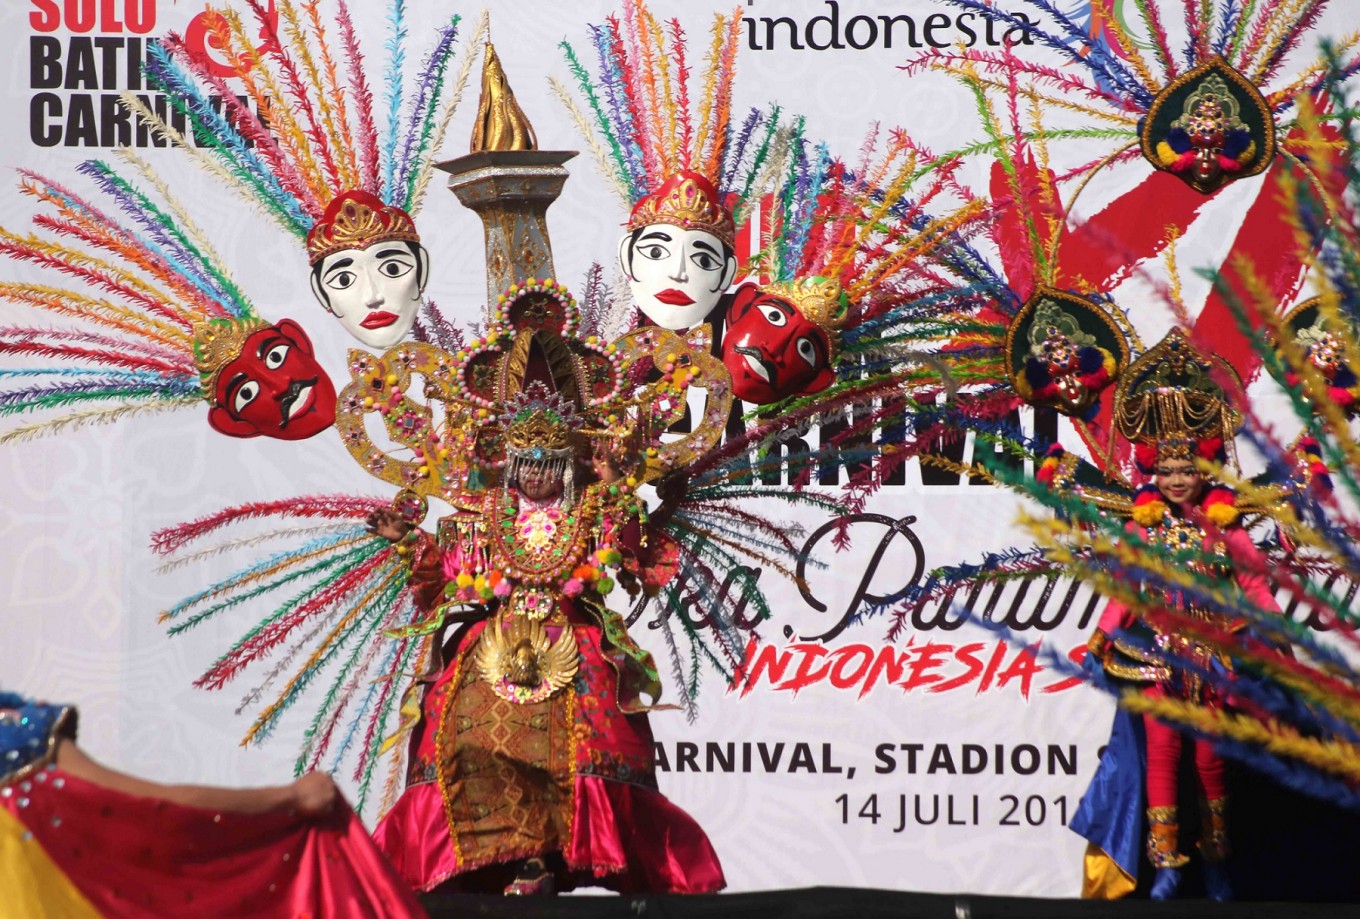 Participants wear Betawi costumes as they grace the Sriwedari stadium catwalk in Surakarta, Central Java, as part of the Solo Batik Carnival. Image: The Jakarta Post